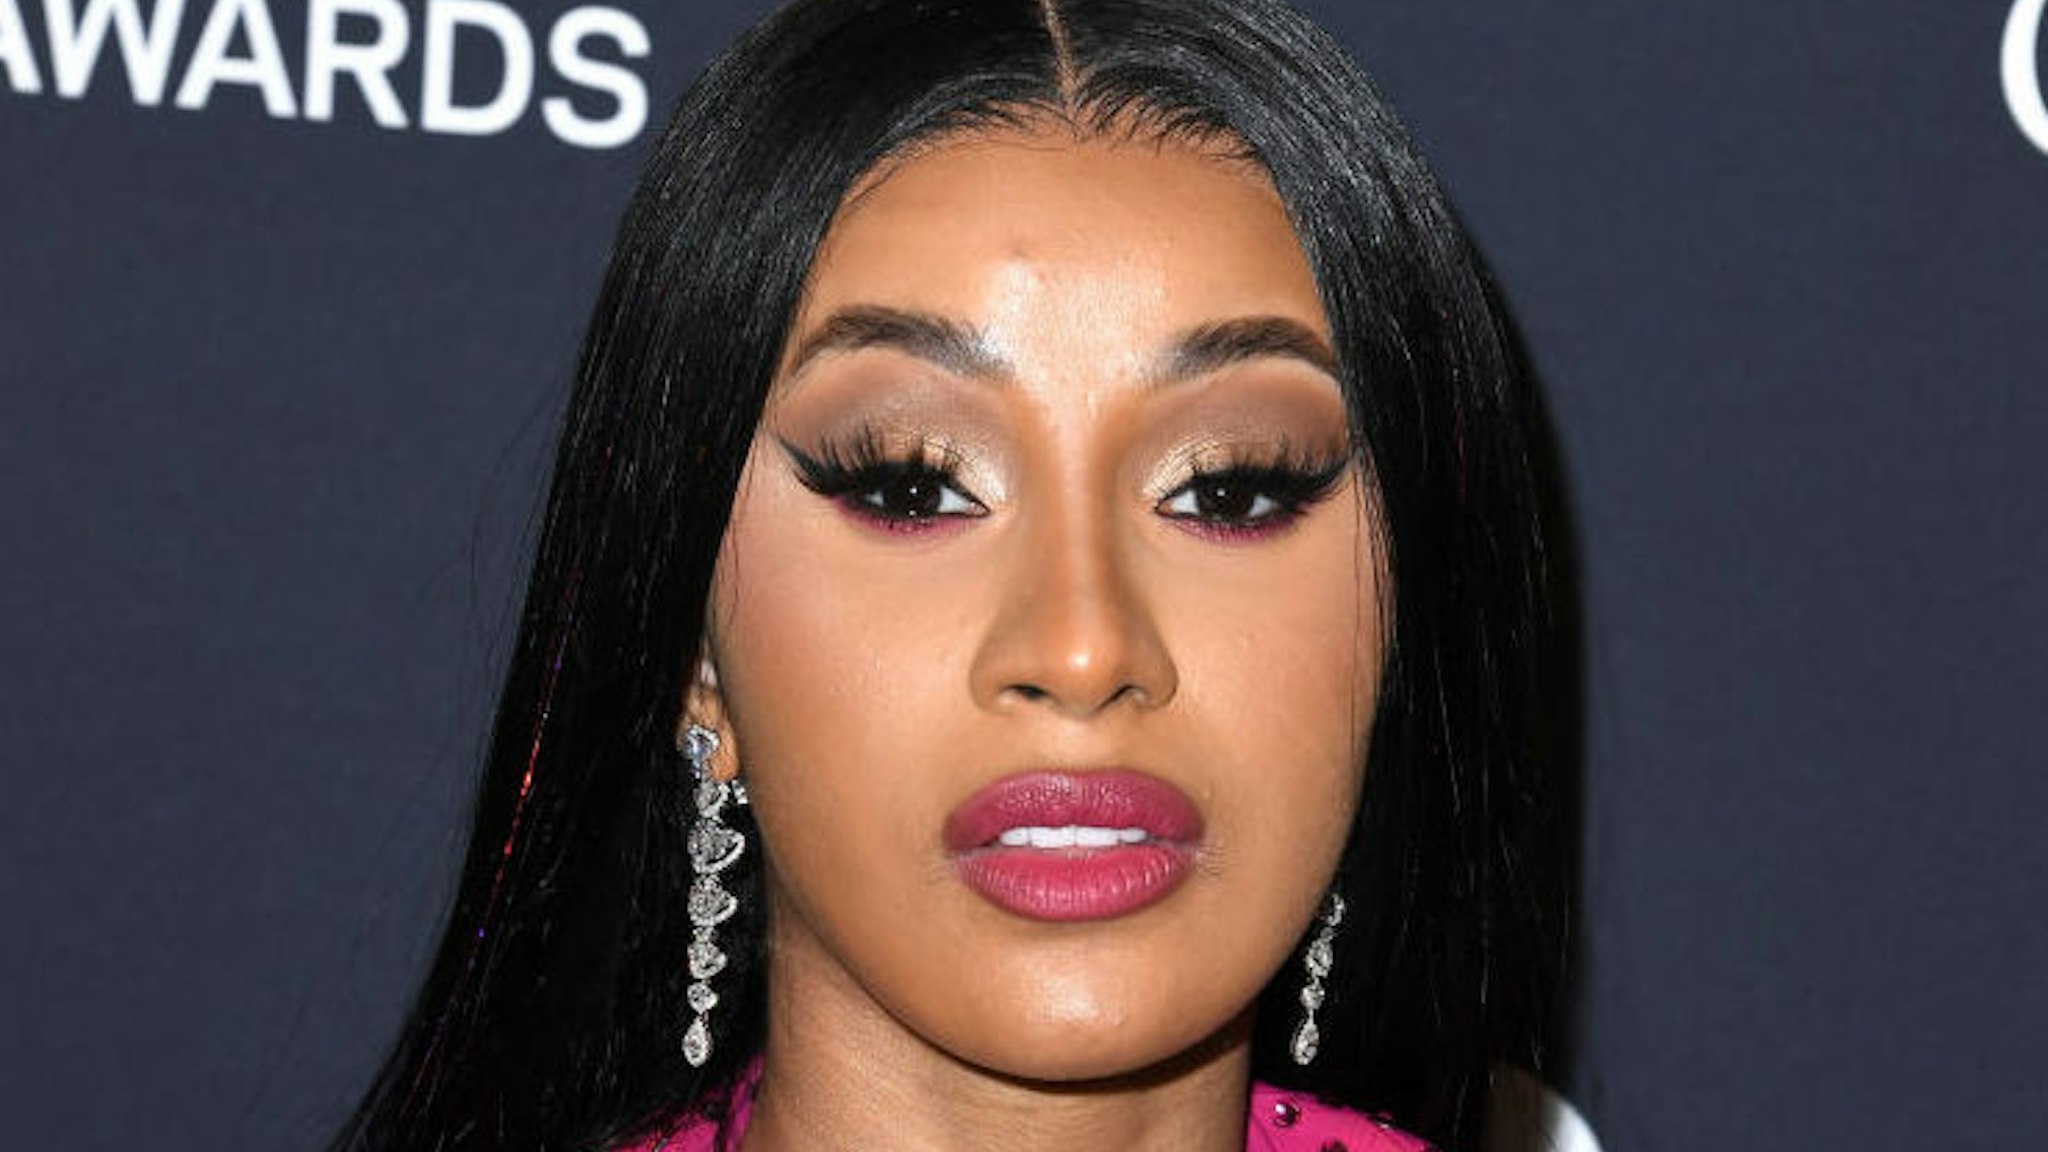 Cardi B arrives at the Pre-GRAMMY Gala and GRAMMY Salute to Industry Icons Honoring Sean "Diddy" Combs at The Beverly Hilton Hotel on January 25, 2020 in Beverly Hills, California.